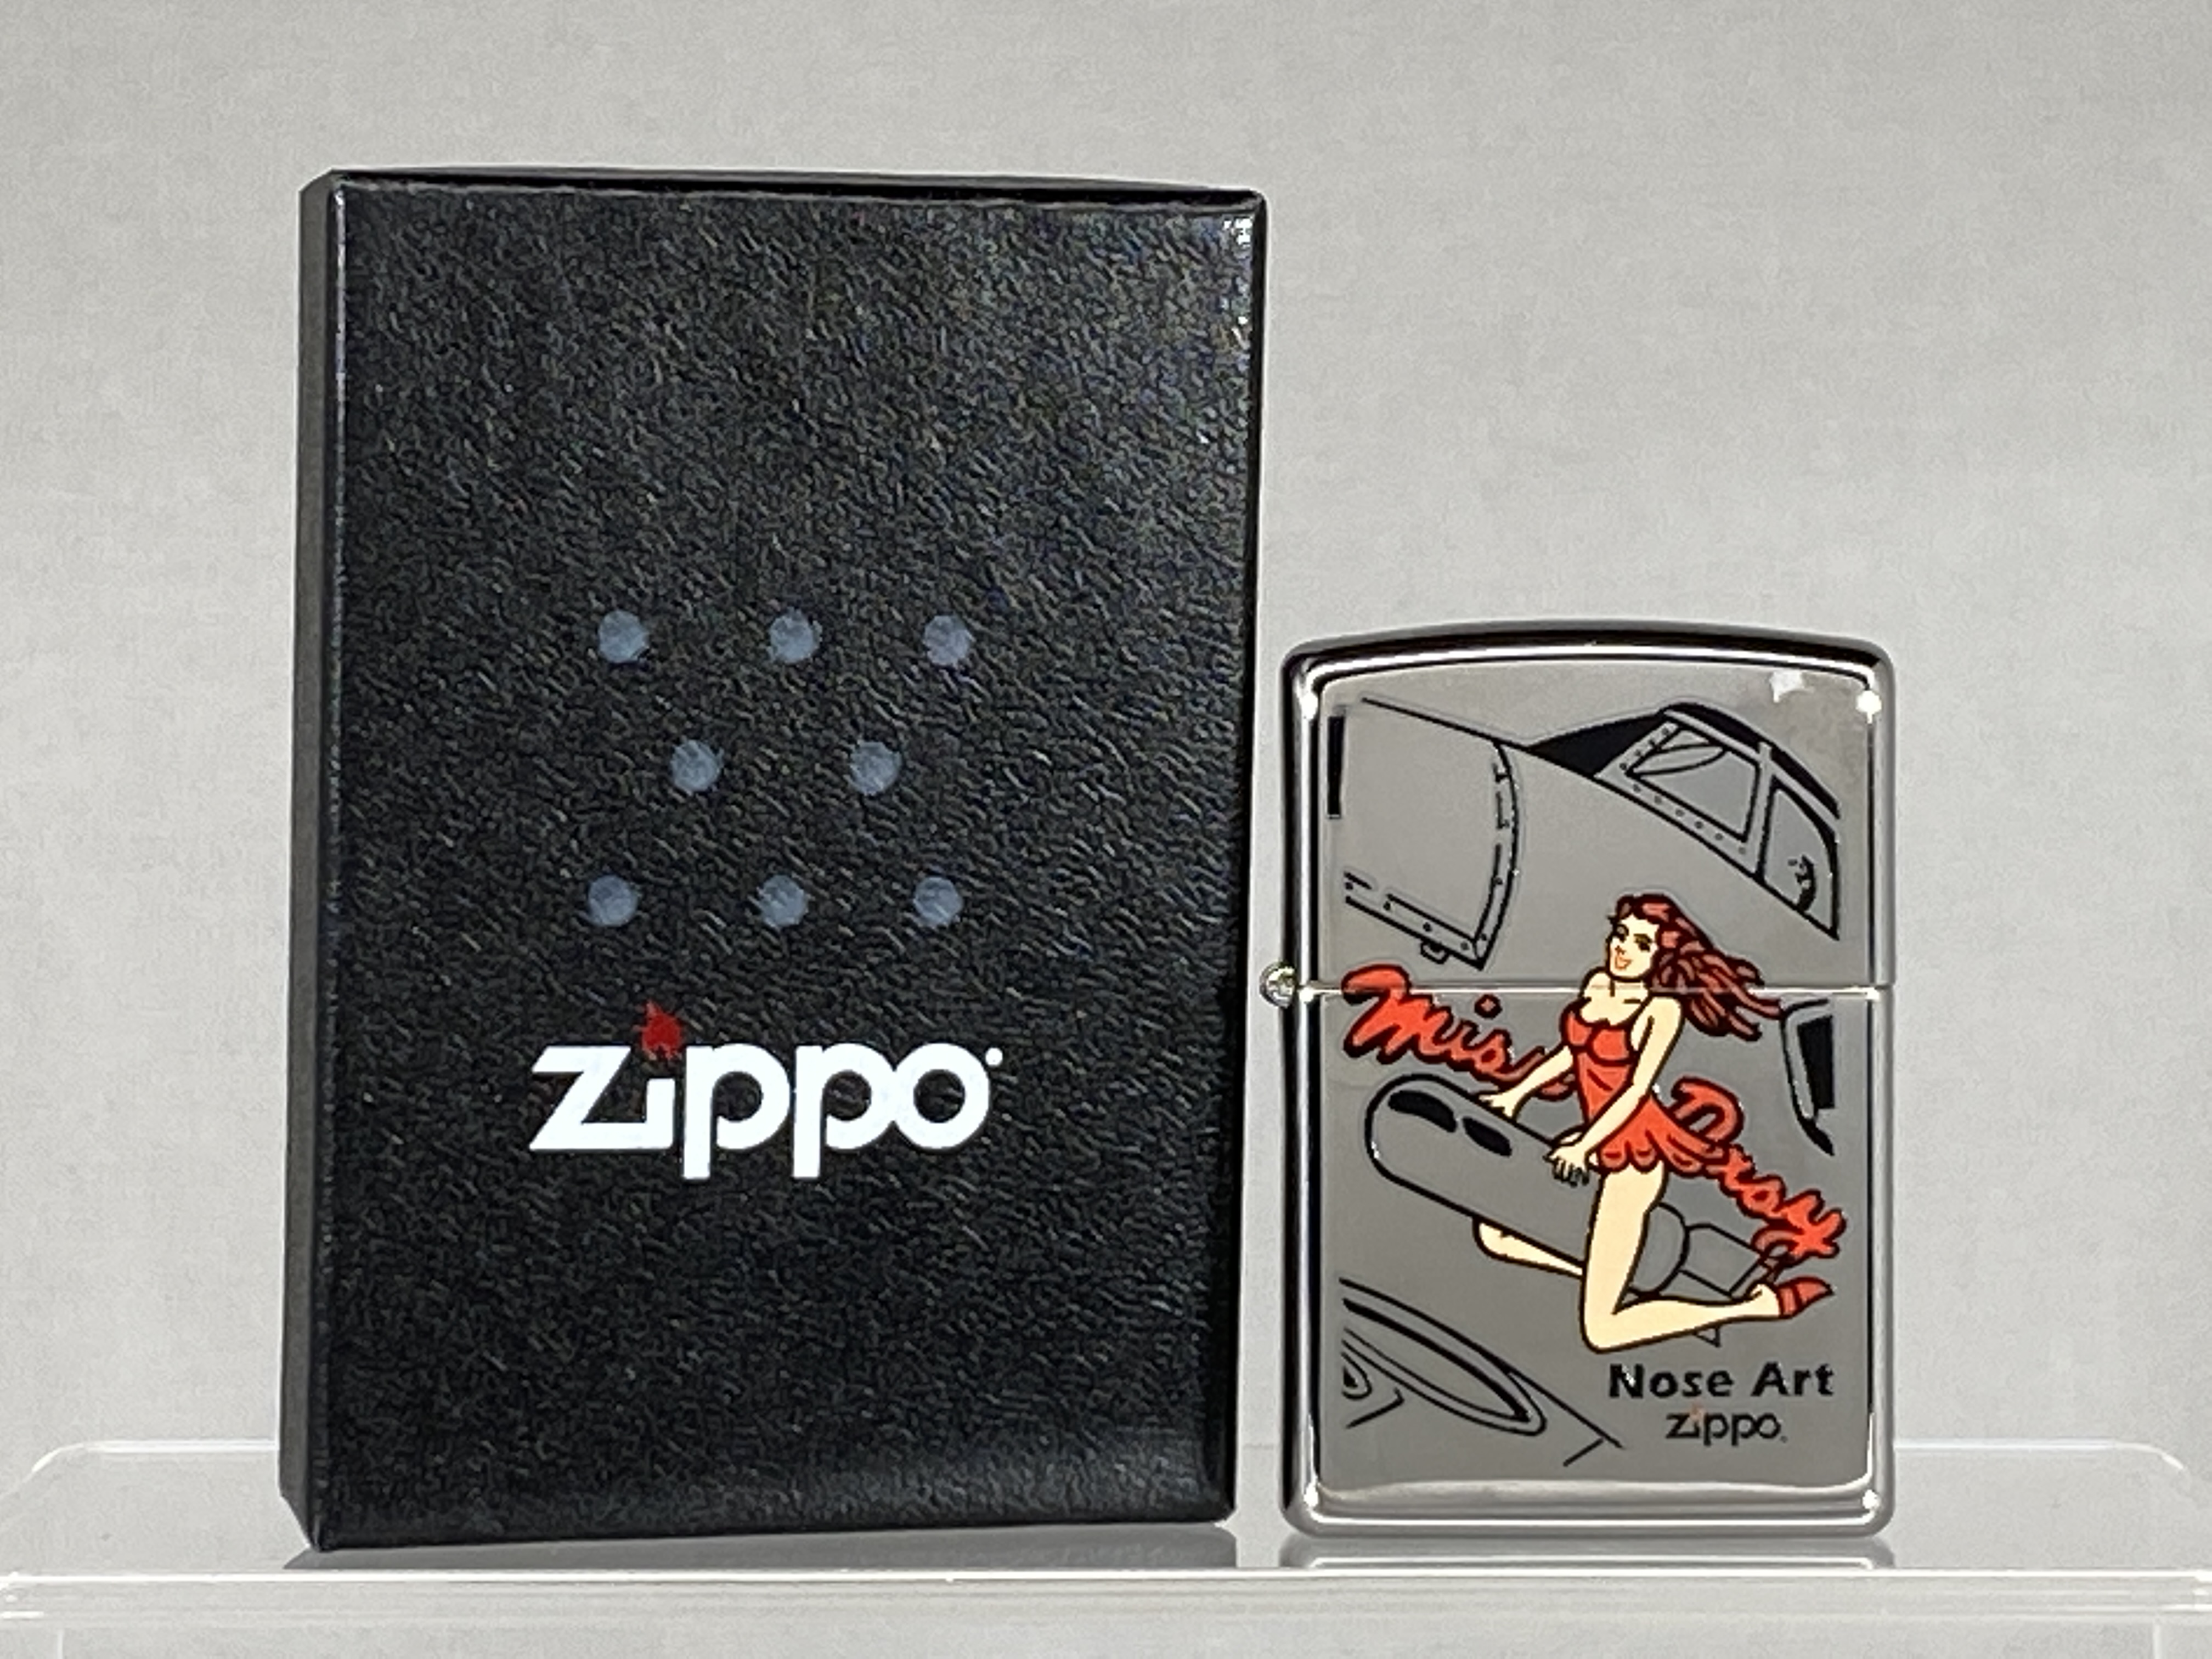 2012 Zippo 250 Nose Art Pinup Girl Polished Chrome Lighter Mint In Box Sealed